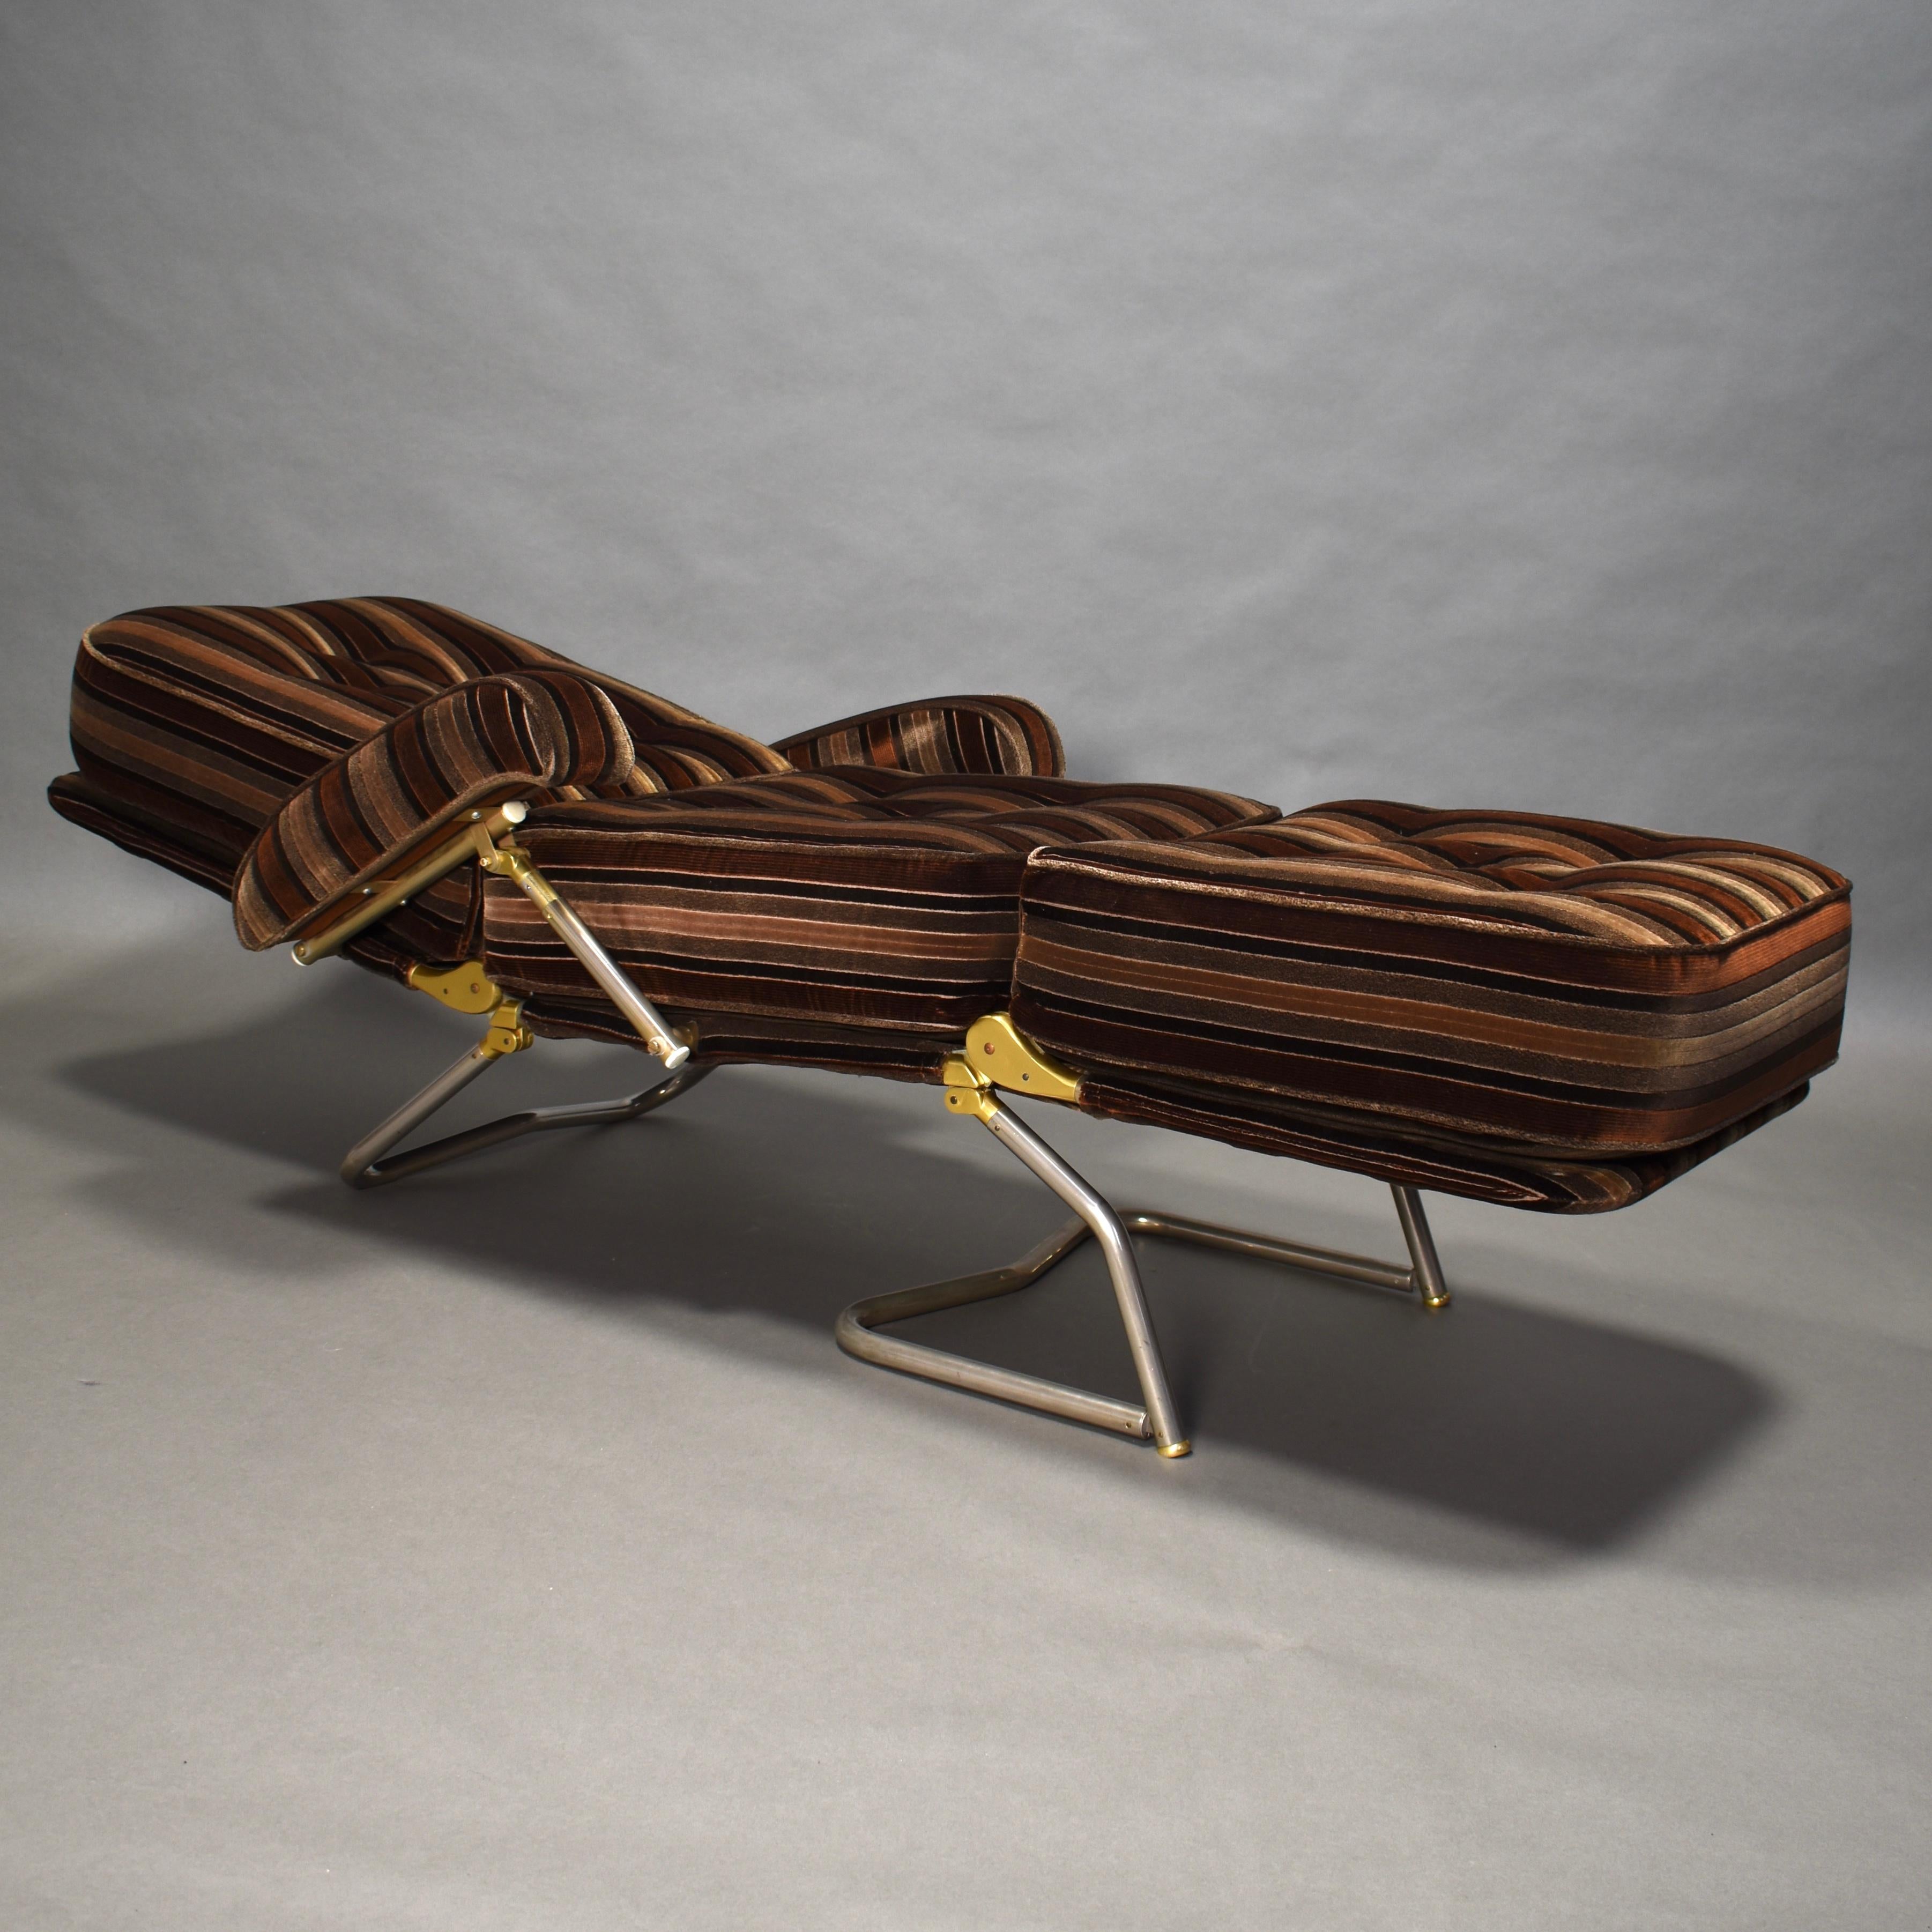 French Daybed Lounge Chair by Condor Paris, Rue La Fayette, France, circa 1970